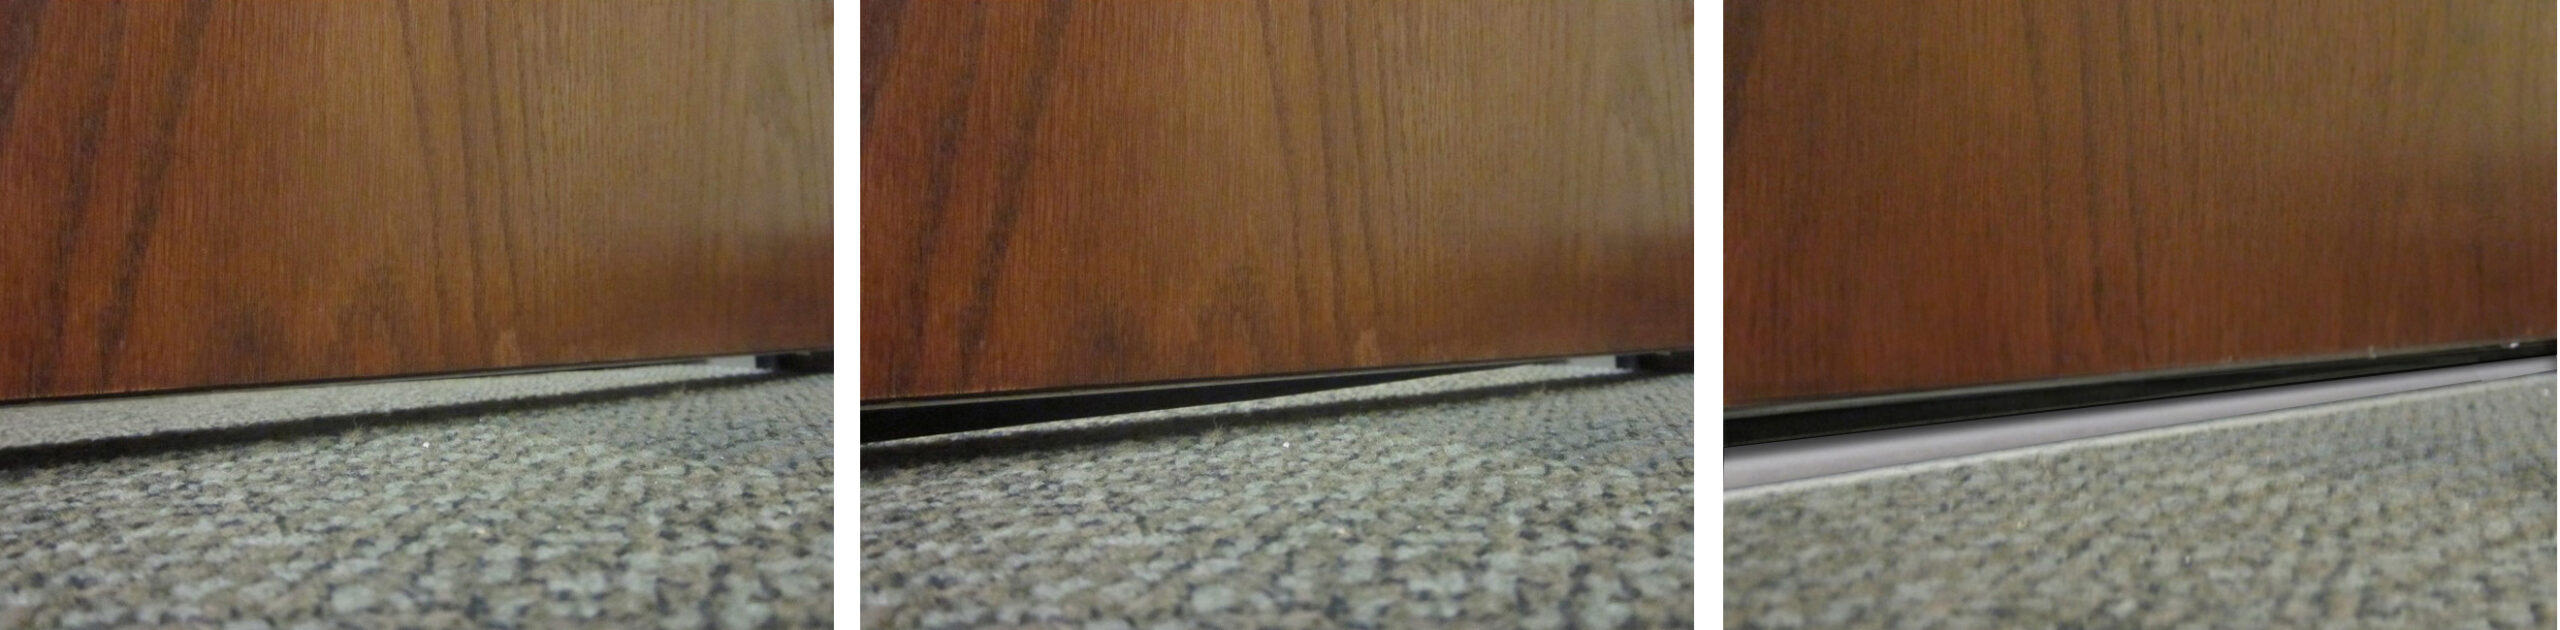 The door is often a very weak point acoustically. Check whether the door seals have any gaps ? Are the seals properly adjusted or misaligned? Do the door seals have something hard to push against to engage them?